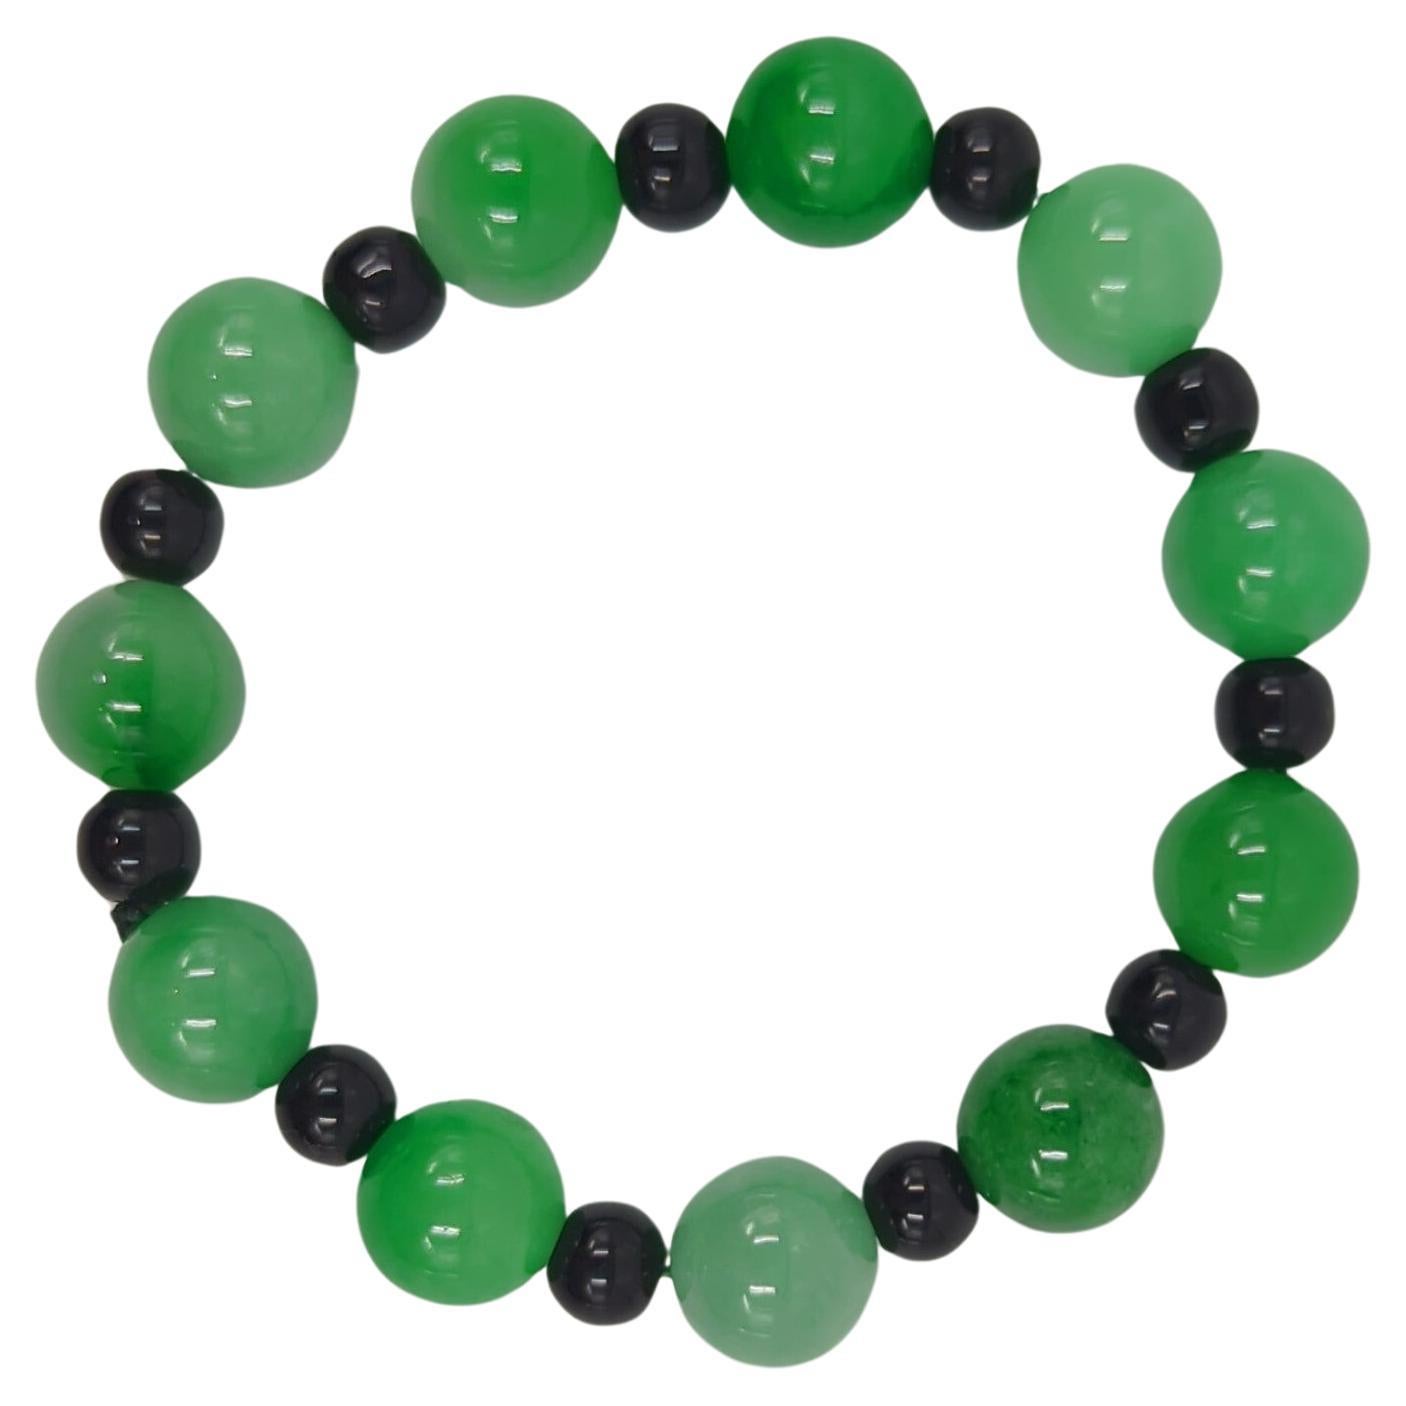 This beautiful vintage Chinese bracelet is a testament to the timeless elegance and allure of natural jadeite jade. Comprising beads of very high-grade emerald green tones, the bracelet exudes a wet, translucent clarity that makes each bead uniquely